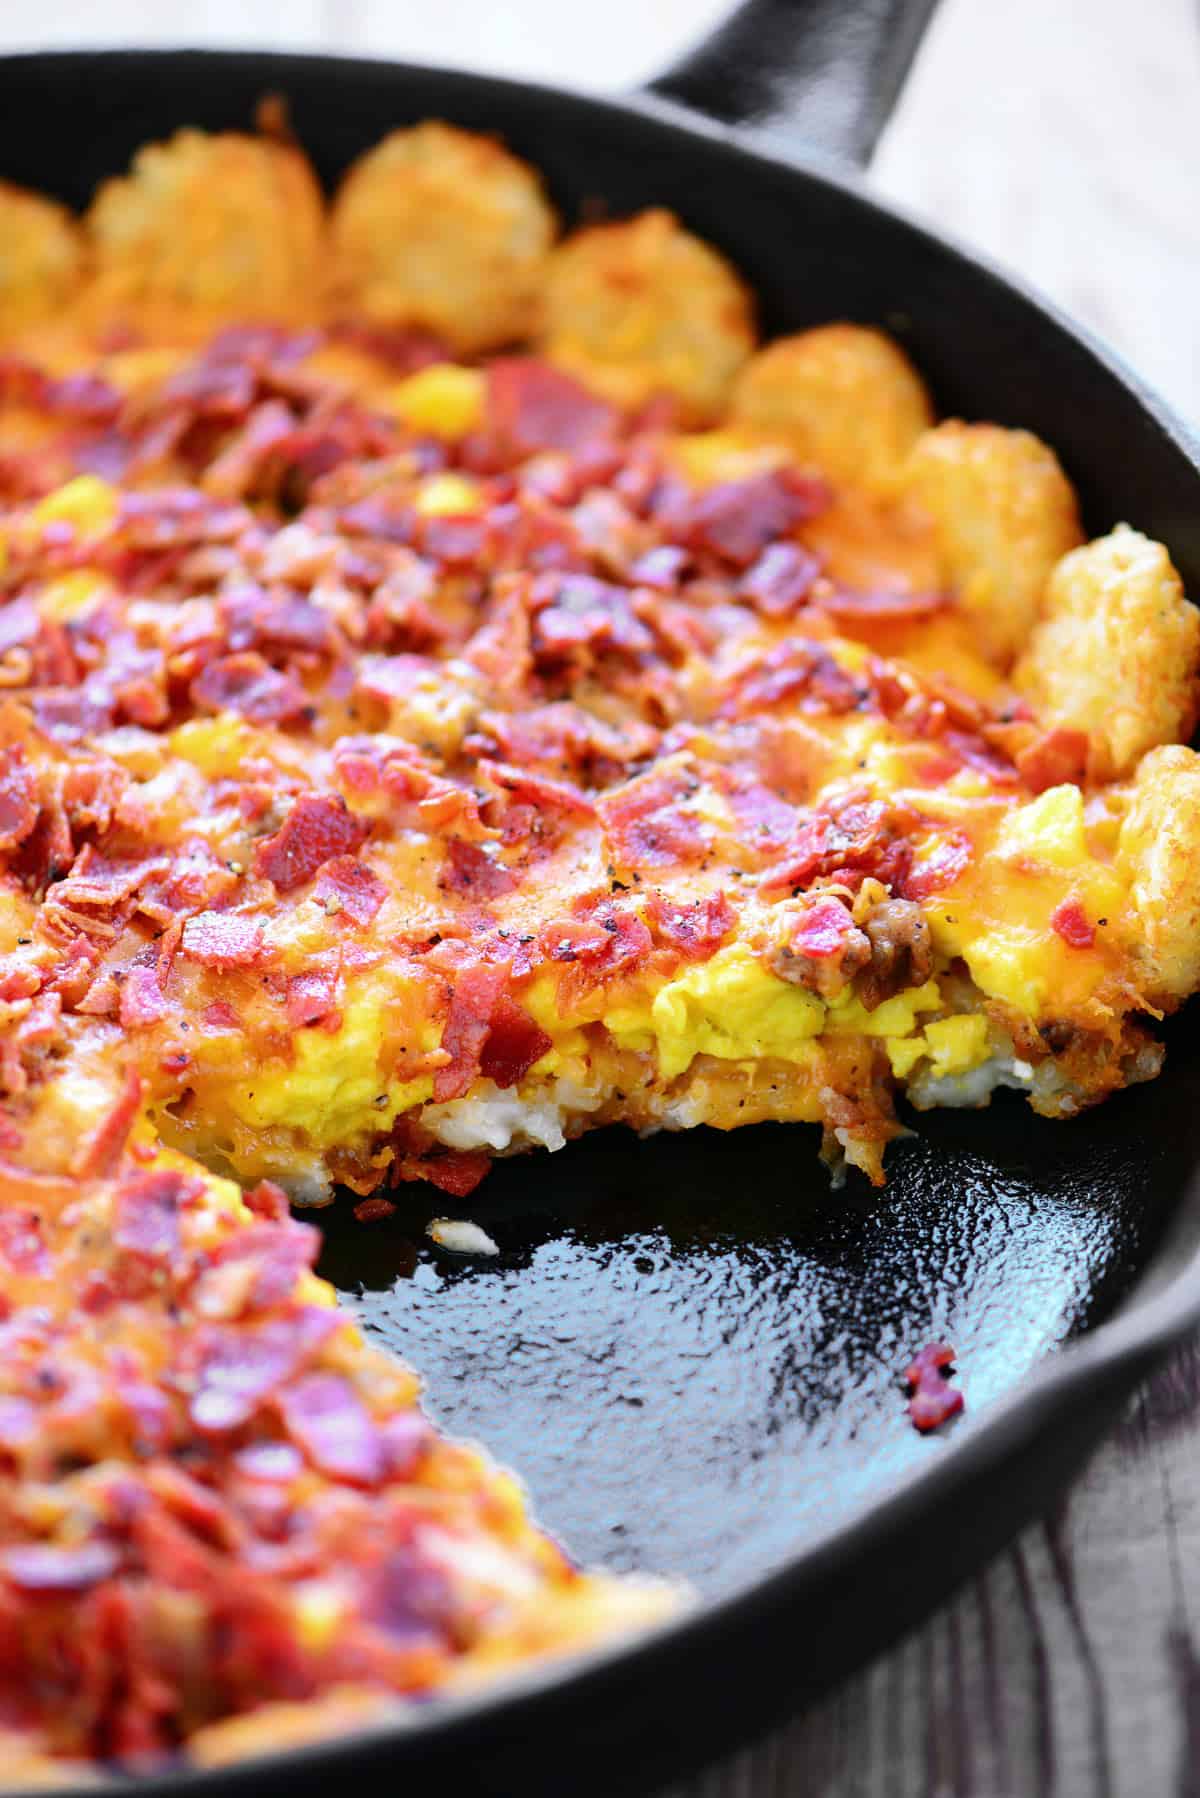 Tater tot breakfast pizza with a slice removed.